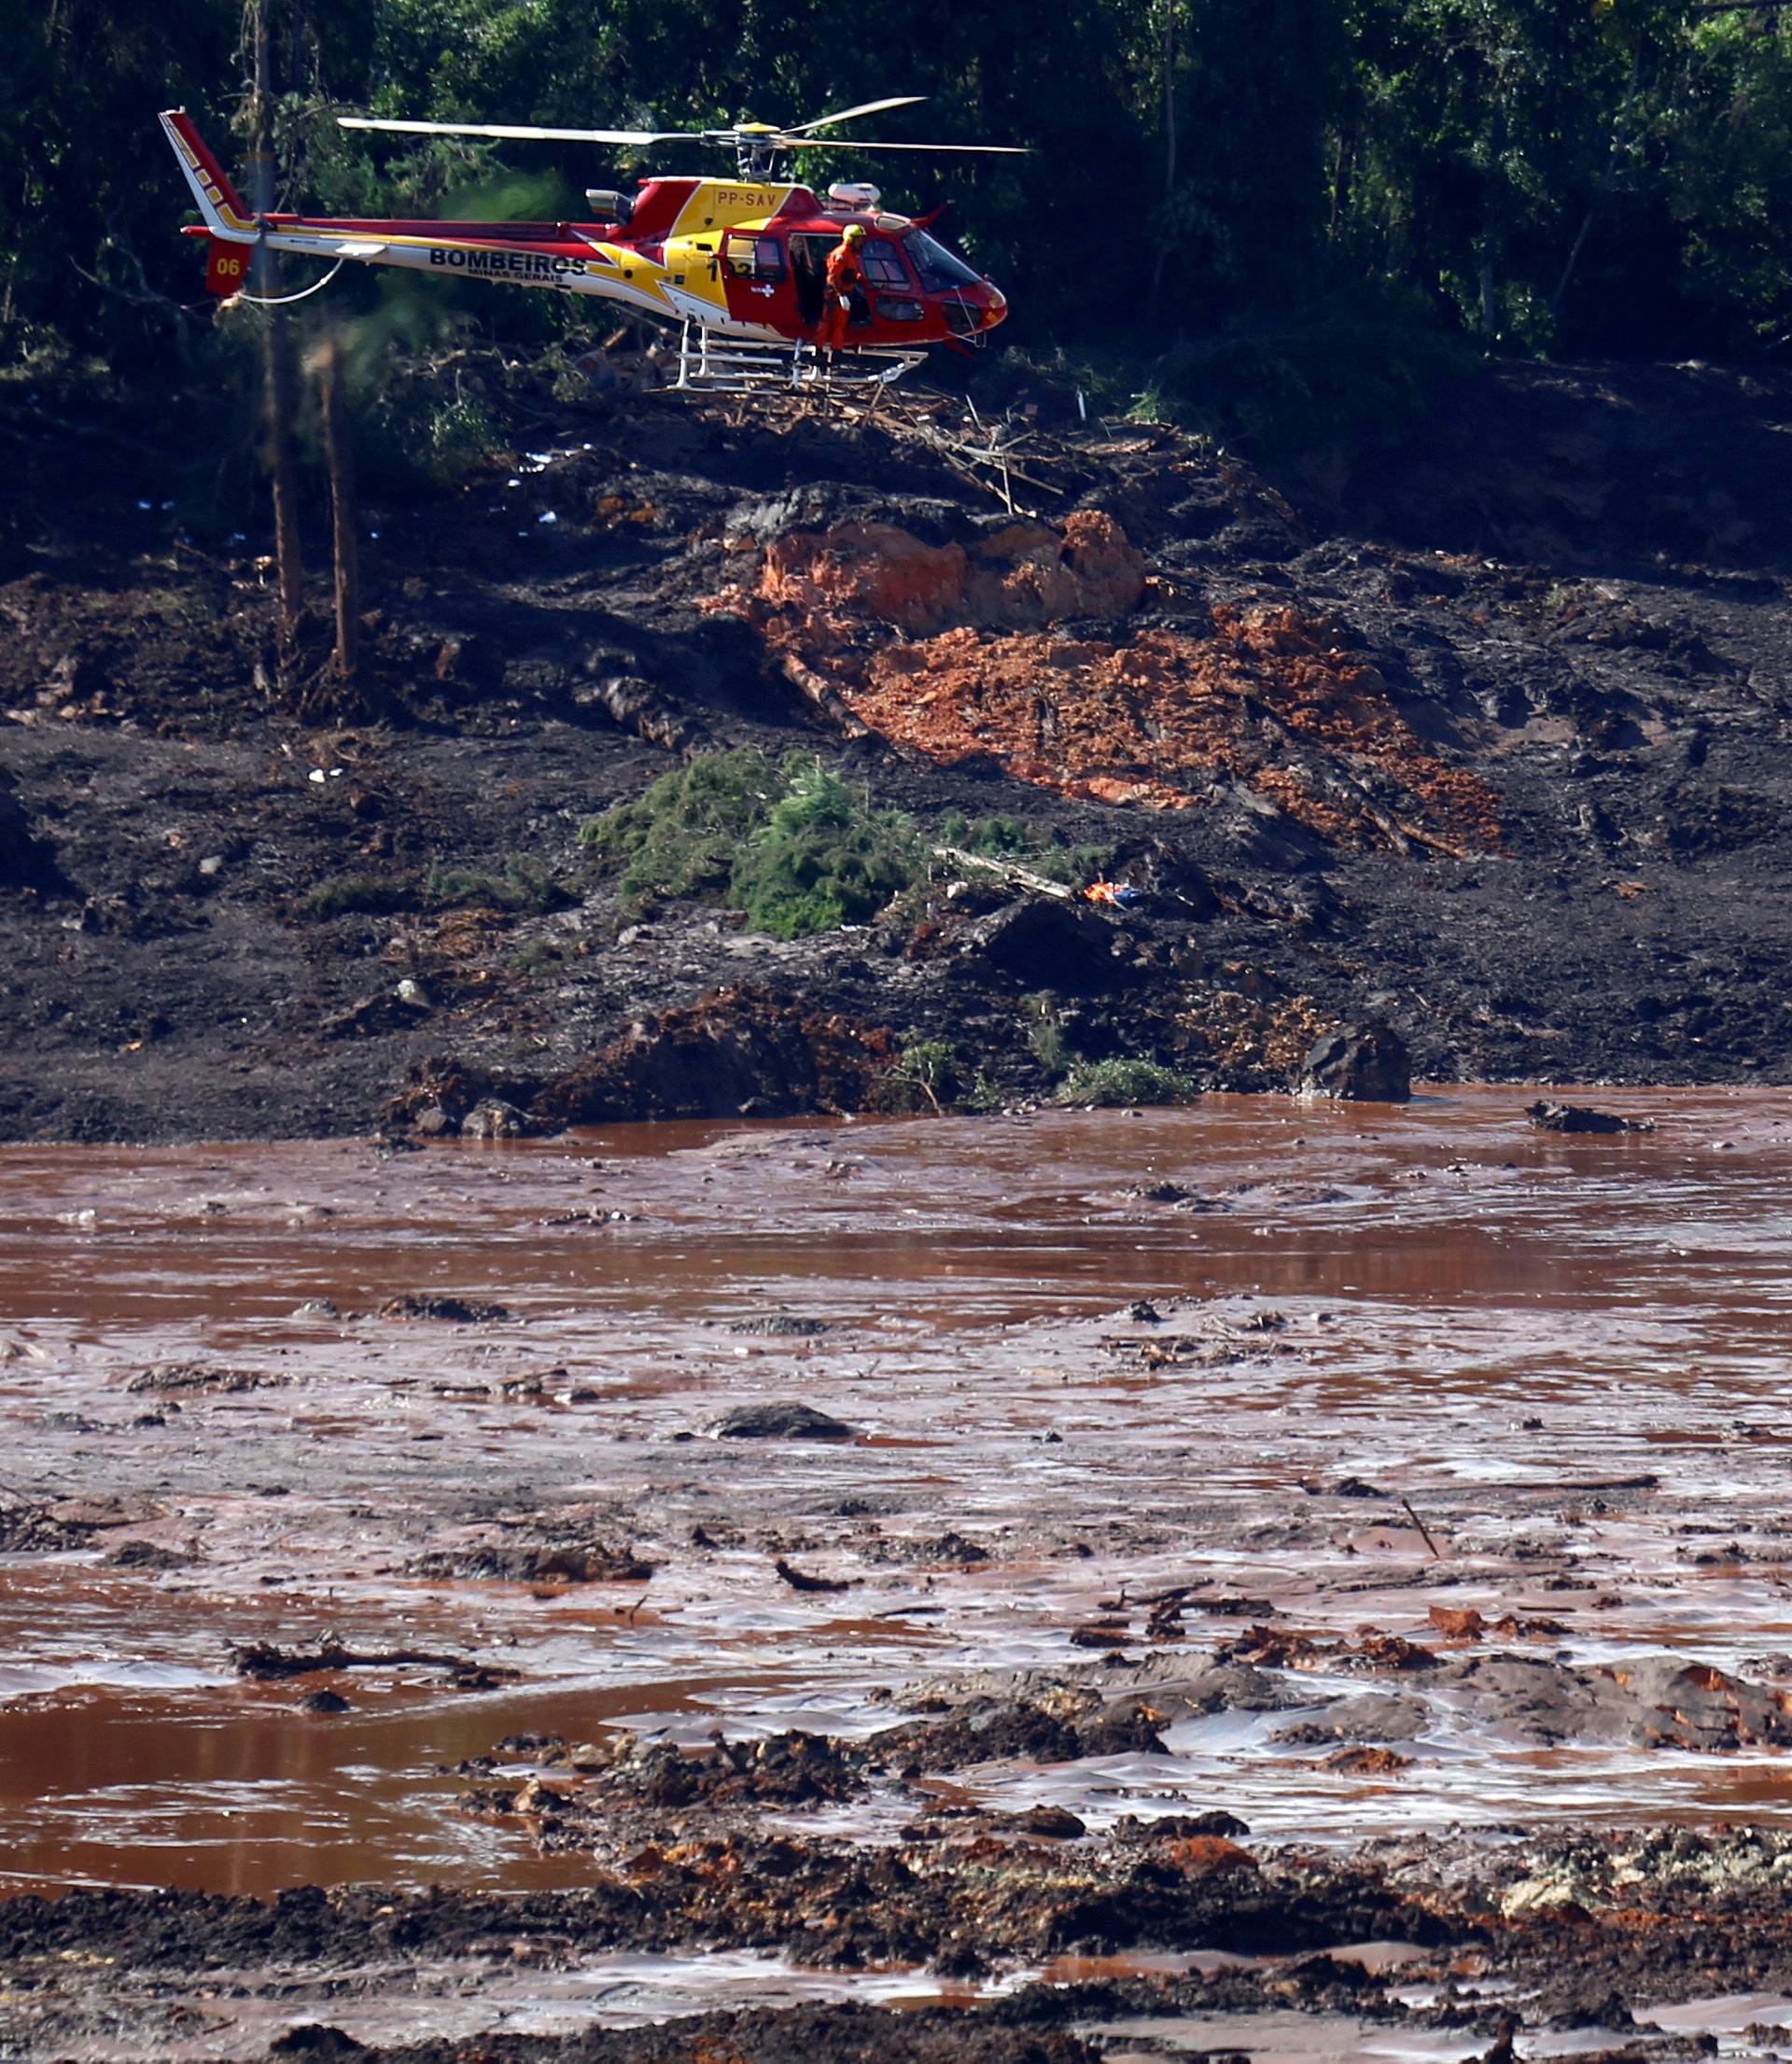 A rescue helicopter searches for victims after a tailings dam owned by Brazilian miner Vale SA burst, in Brumadinho